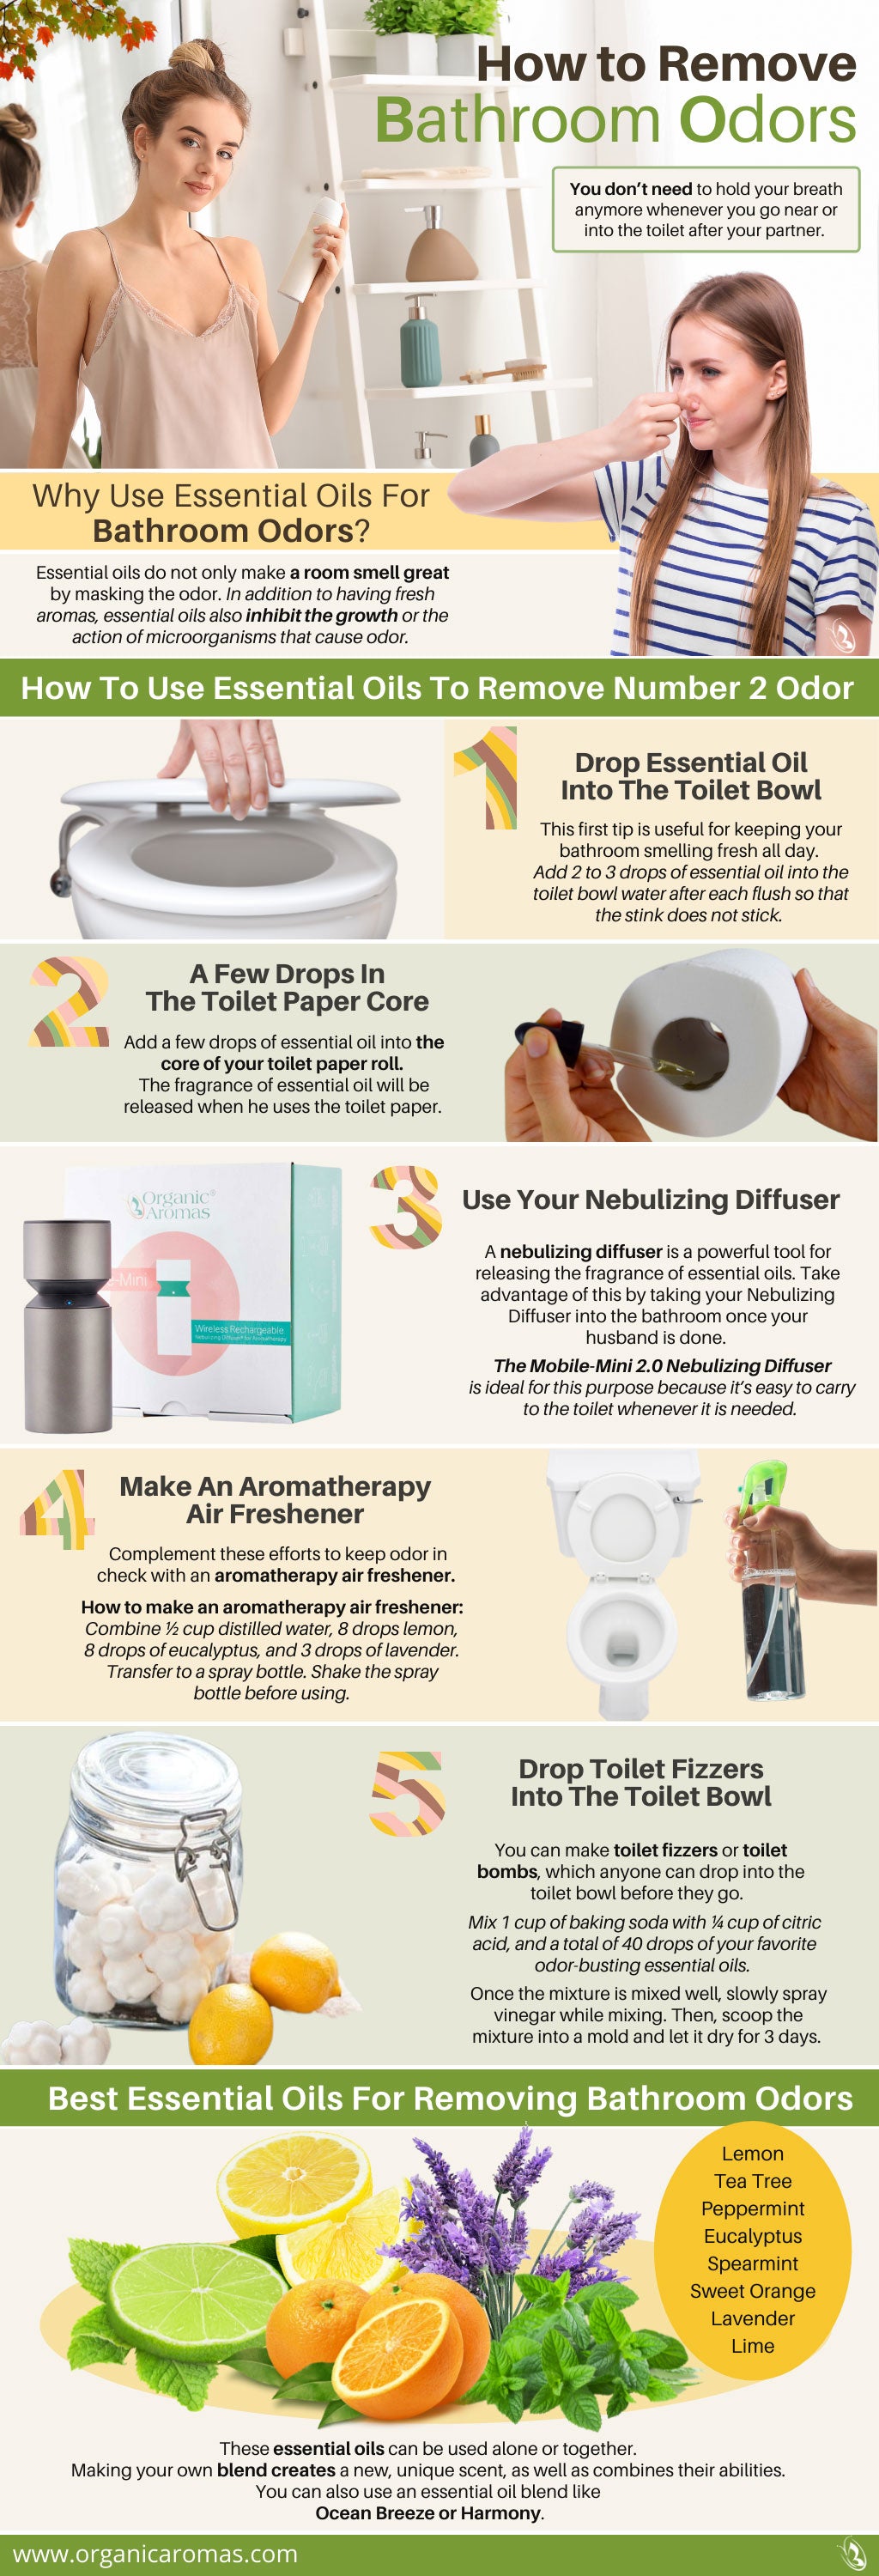 How to Remove Bathroom Odors